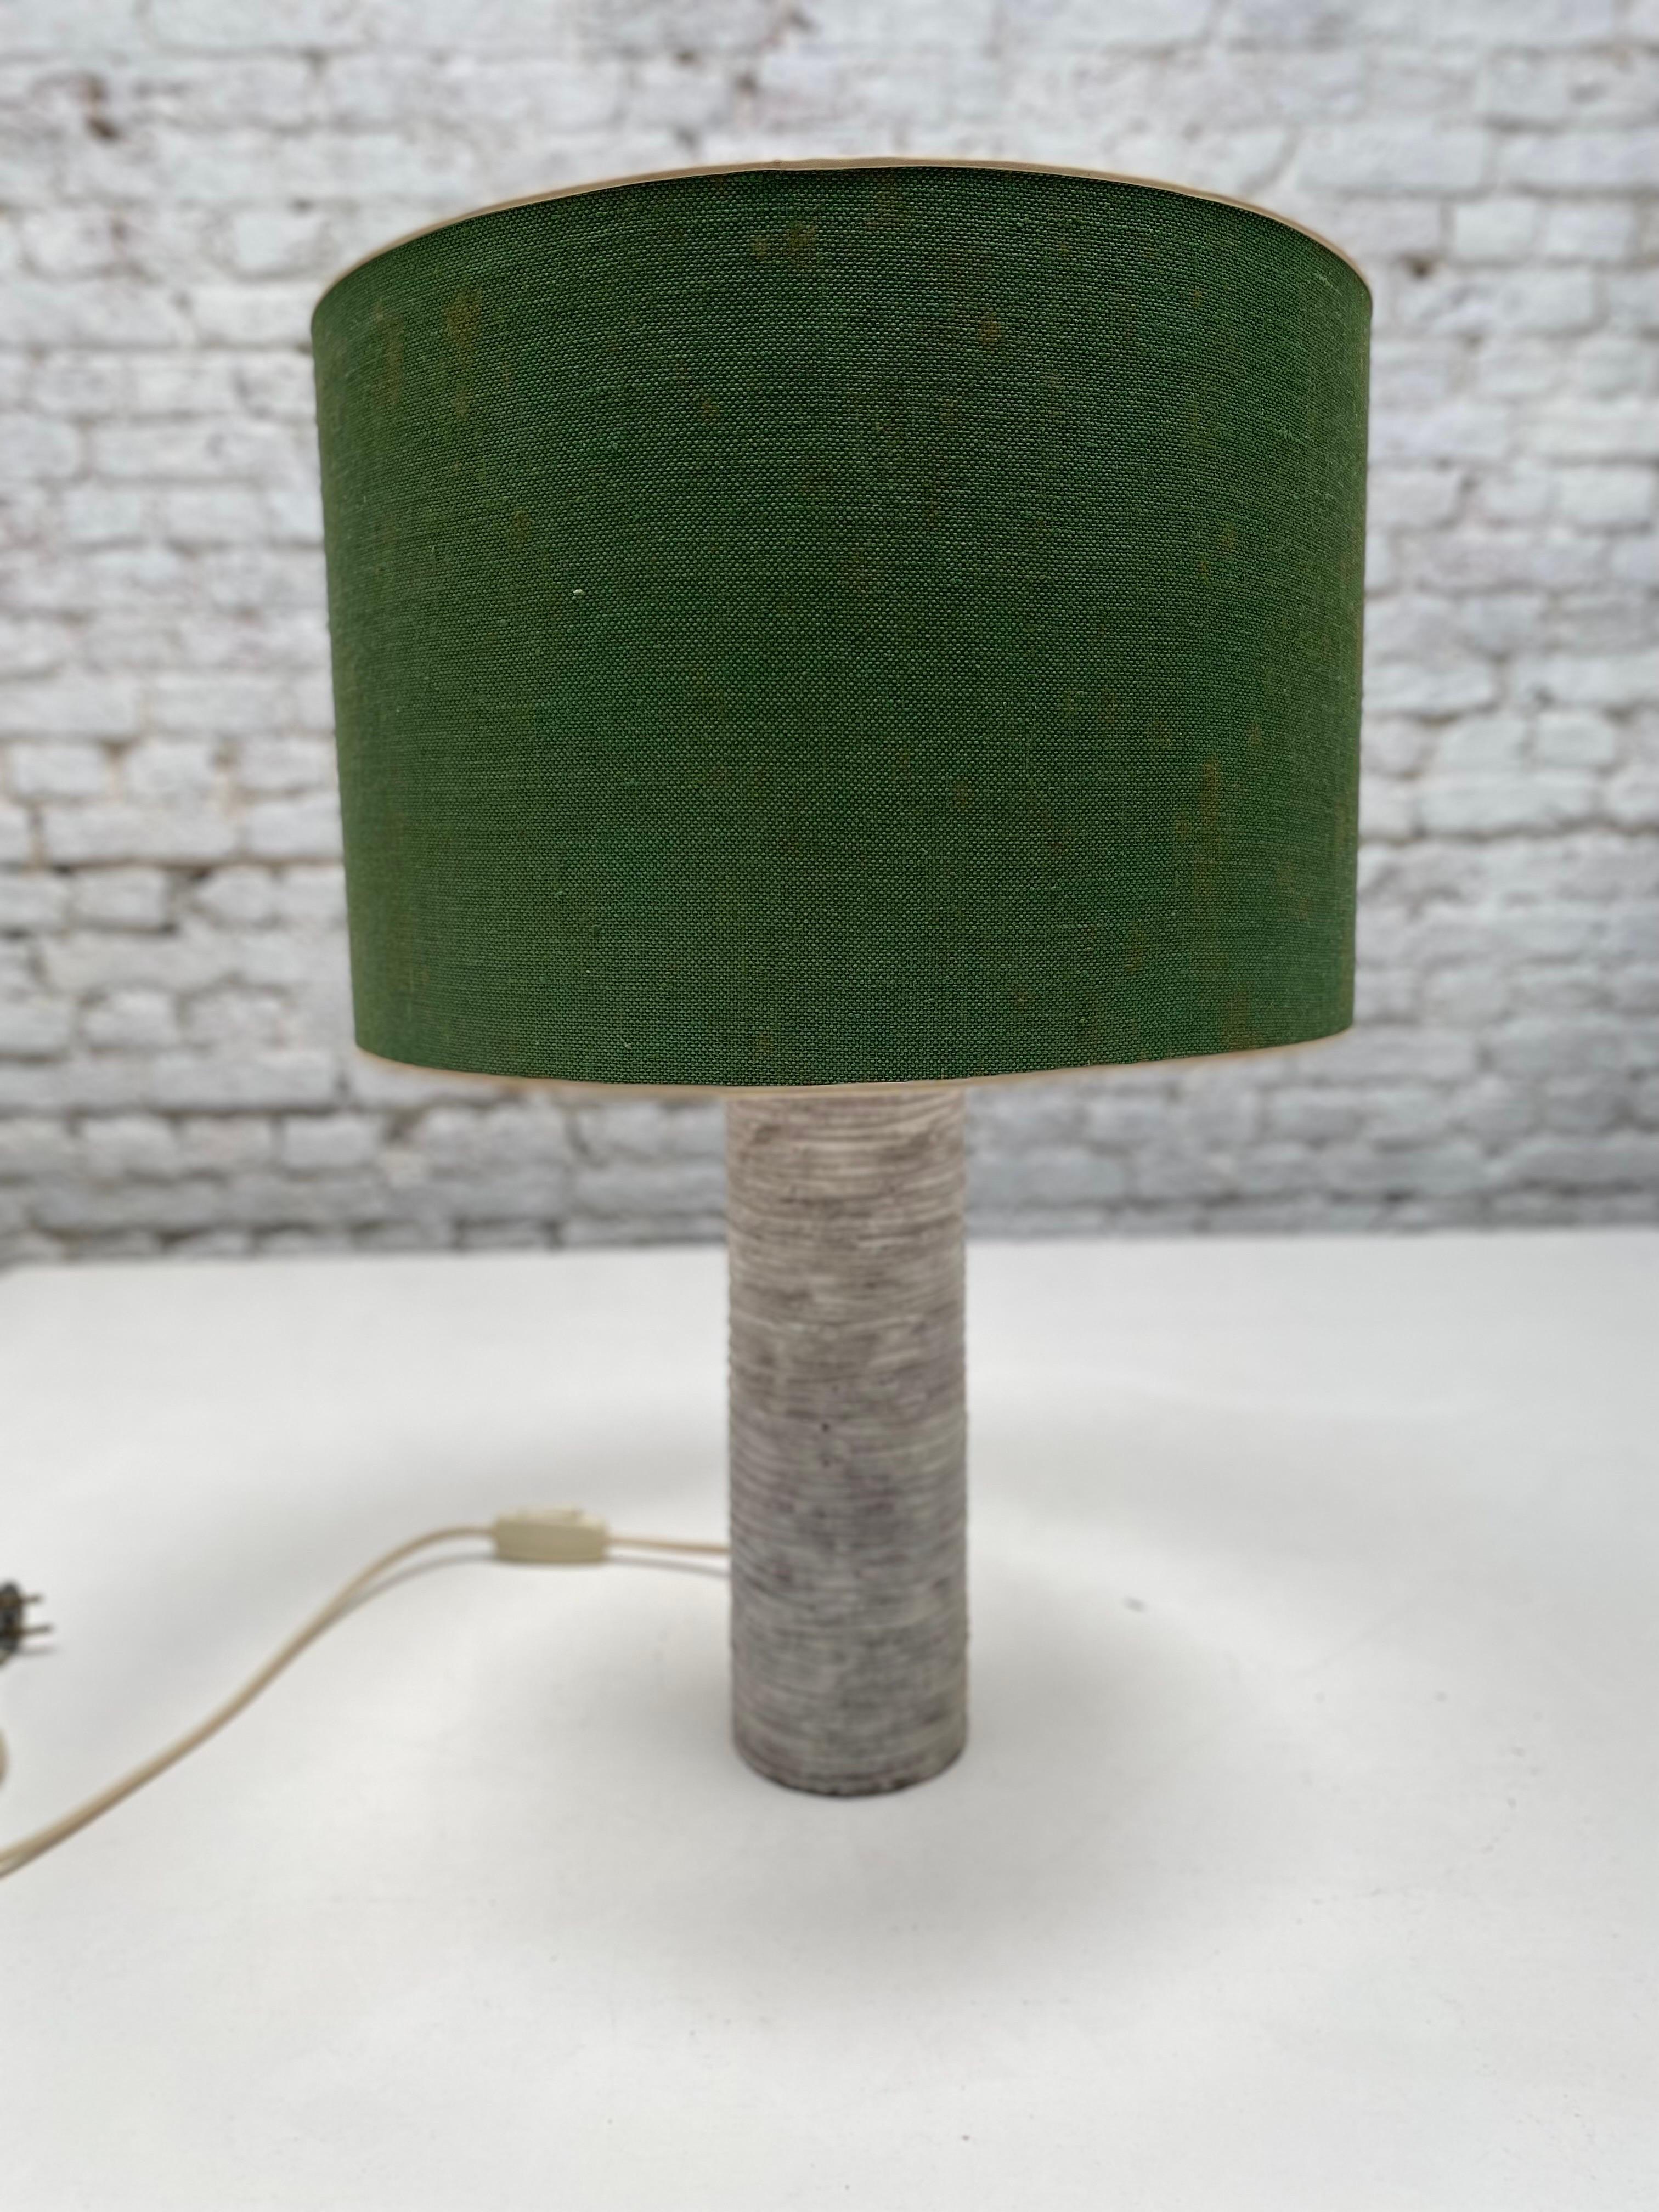 Danish Mid-Century Modern Ceramic Table Lamp with Green Shade For Sale